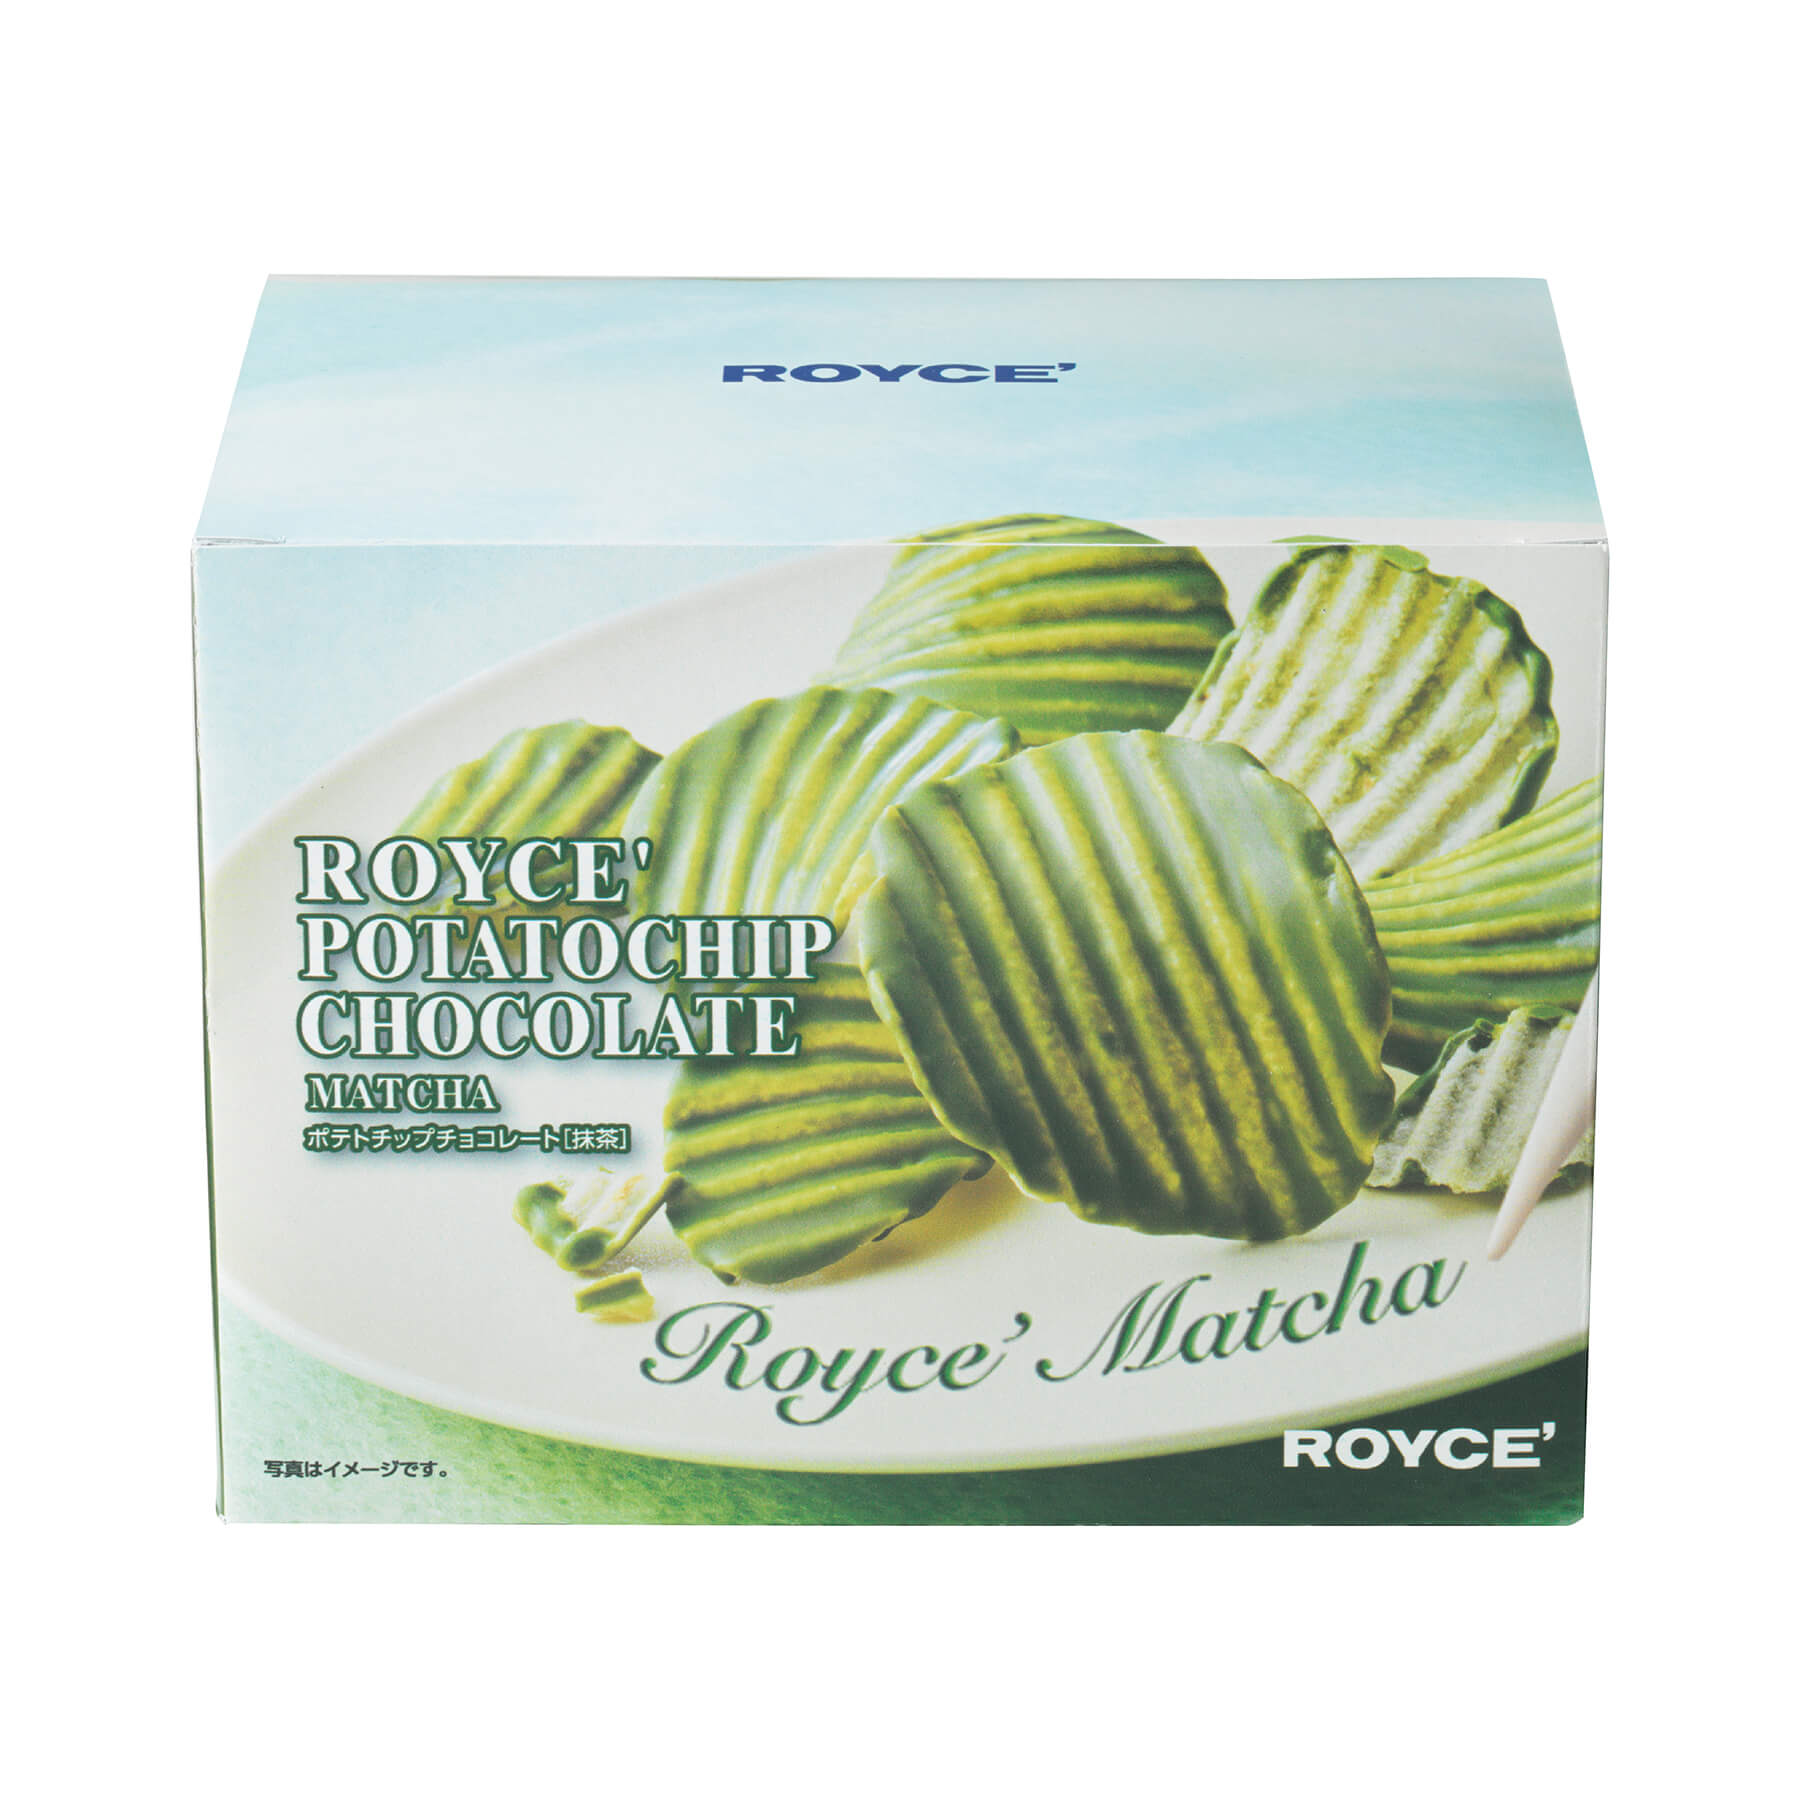 ROYCE' Chocolate - Potatochip Chocolate "Matcha" - Image shows a box colored in shades of blue and green with a picture of green potato chips on a plate. Text says ROYCE'. ROYCE' Potatochip Chocolate Matcha. ROYCE' Matcha. ROYCE'.